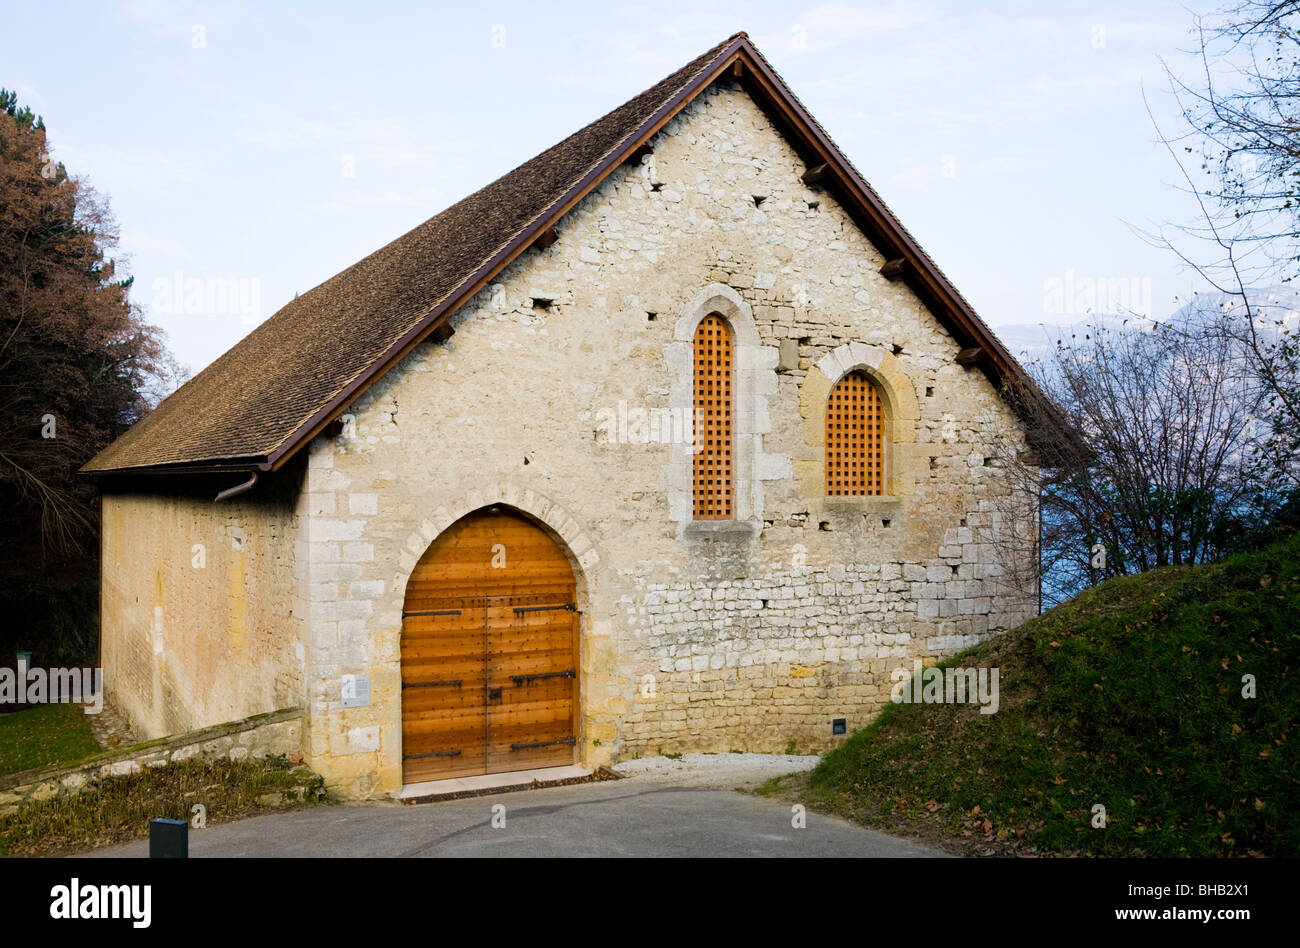 Boat house at Hautecombe Abbey in Saint-Pierre-de-Curtille near Aix-les-Bains in Savoy, France. Stock Photo